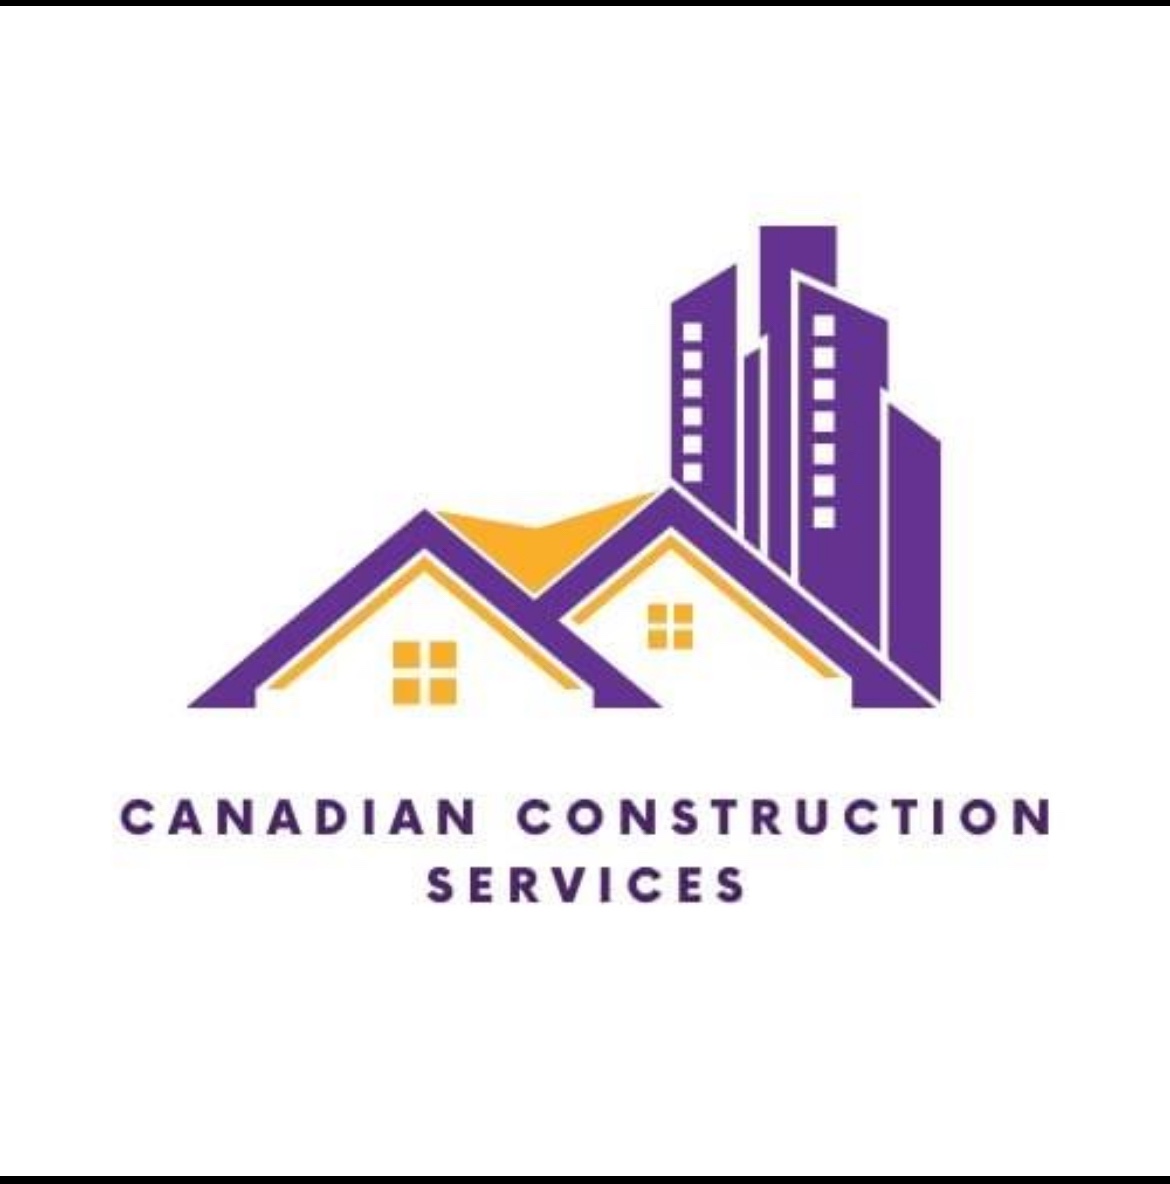 Canadian Construction Services's logo